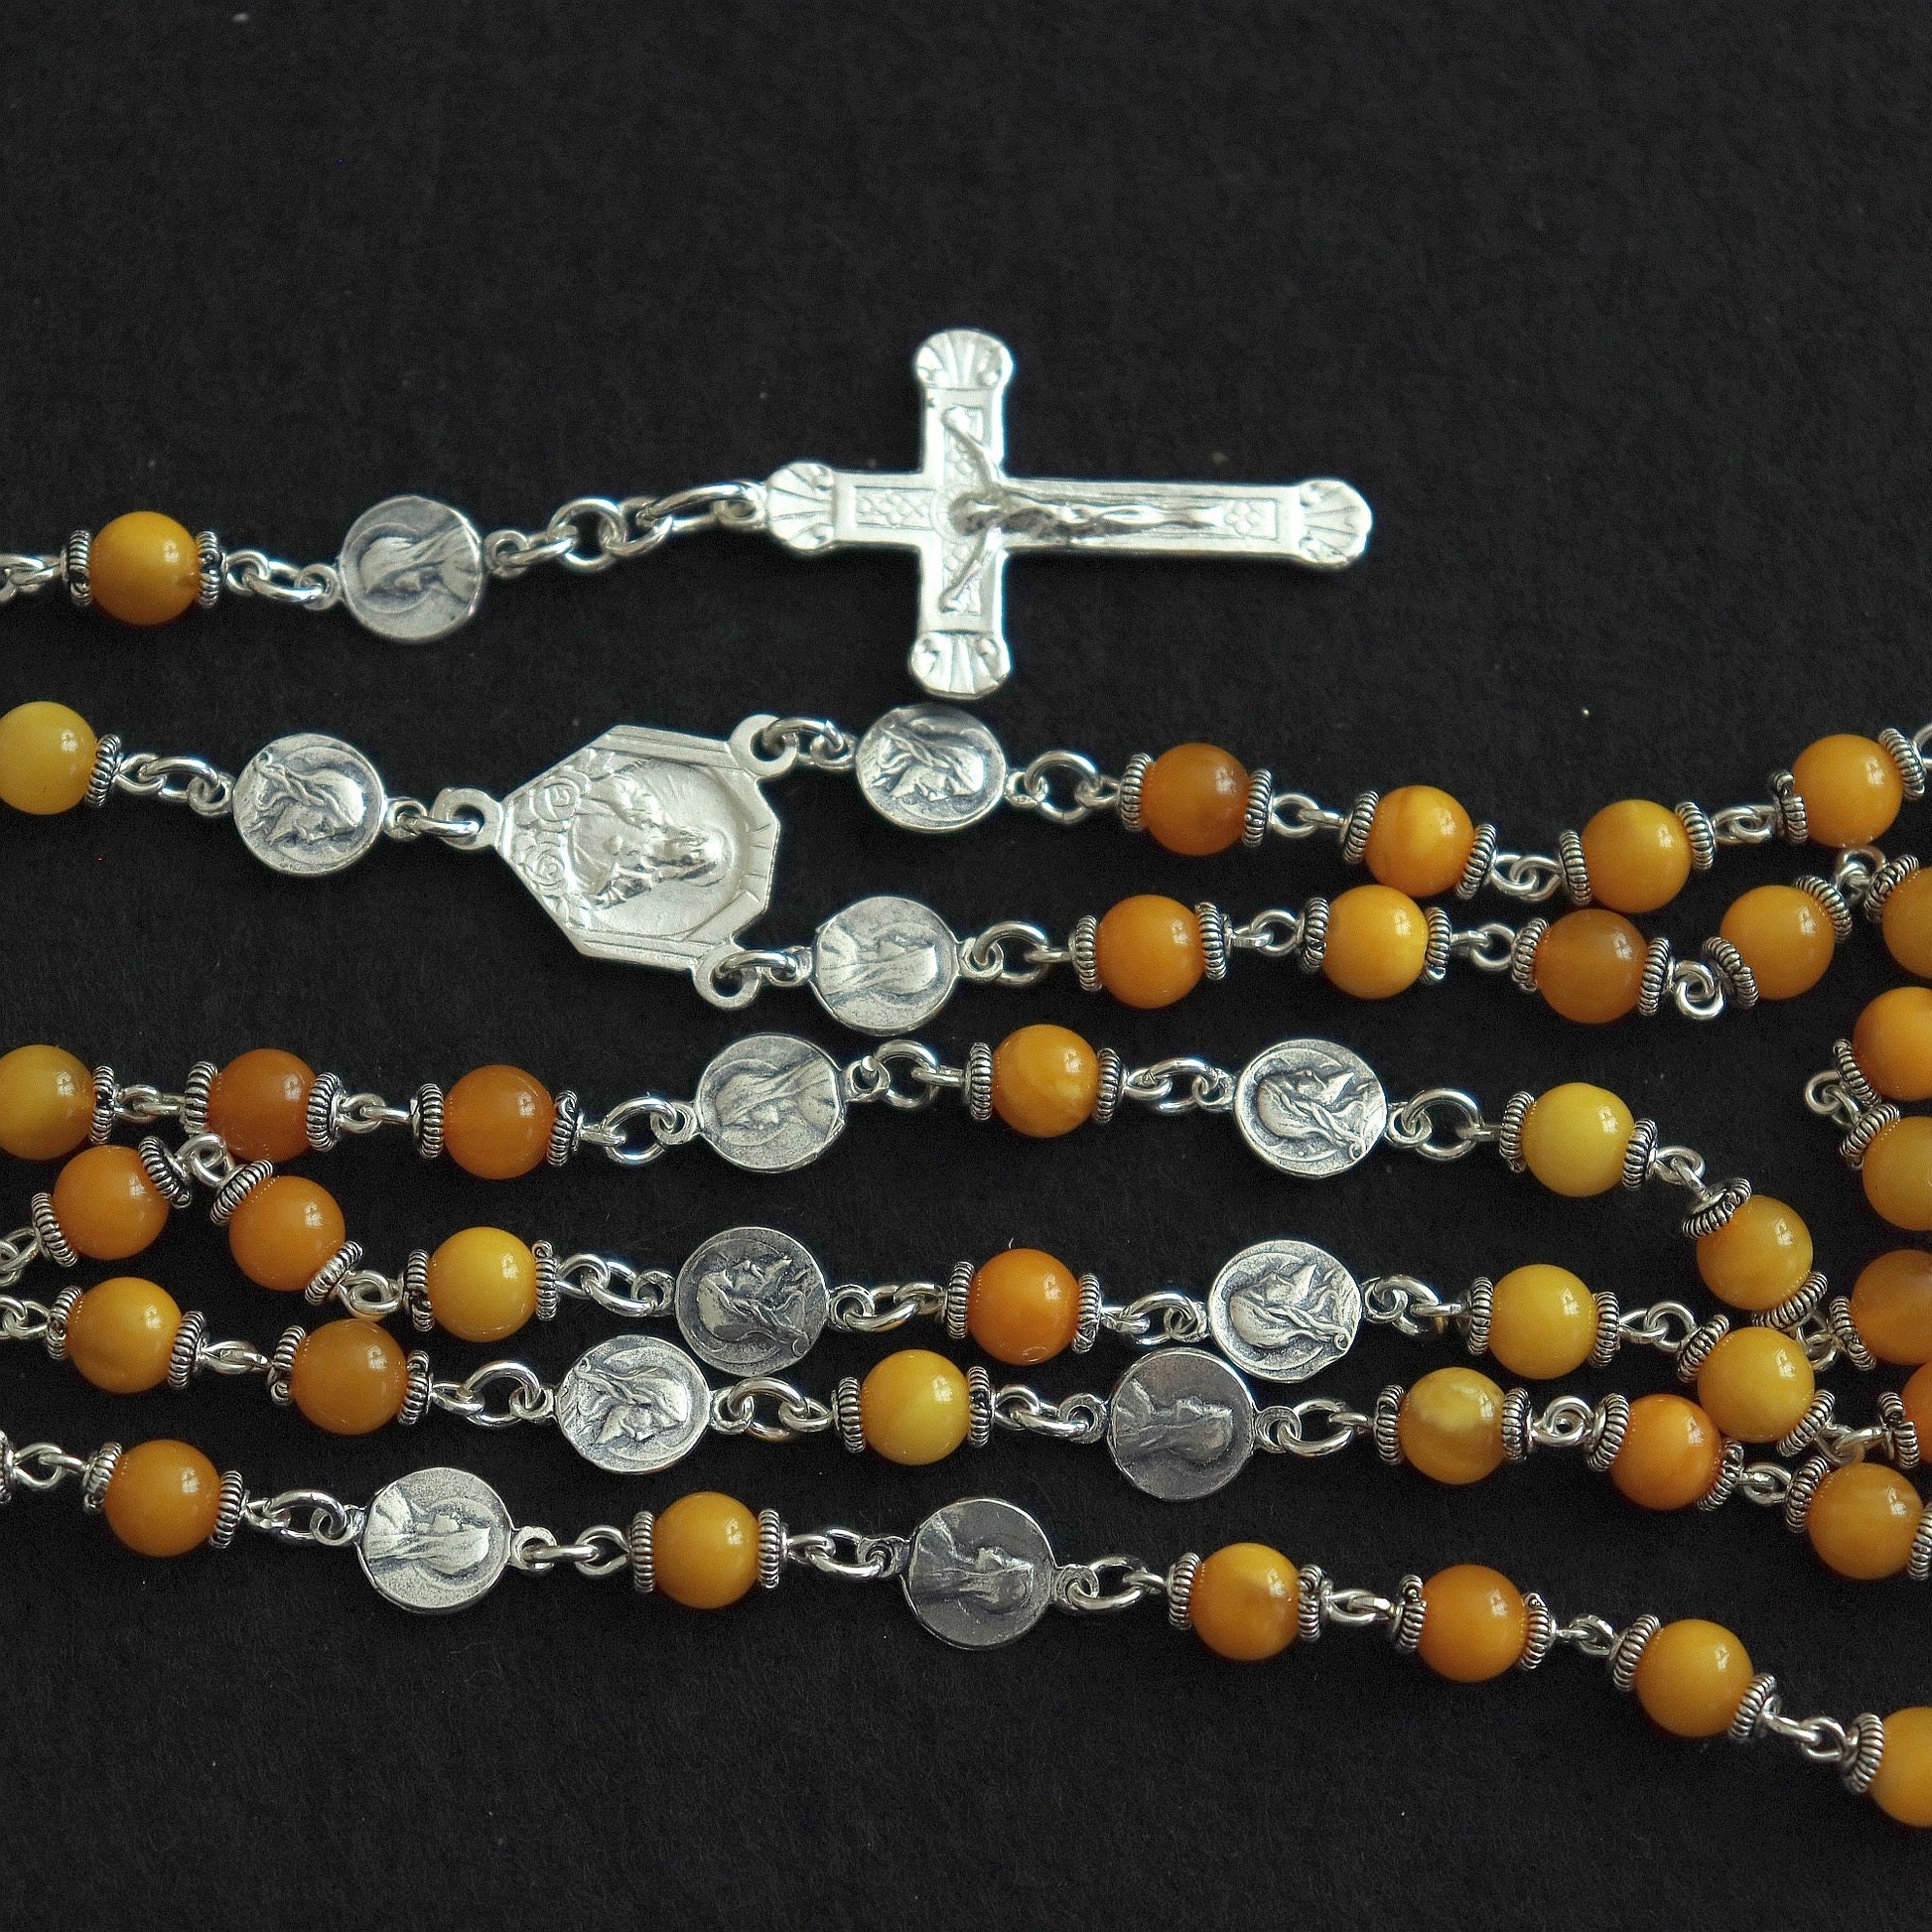 Butterscotch Amber and Sterling Fatima Rosary, 1960s Vintage Catholic Prayer Beads, Sacred Heart Necklace, Religious Heirloom, Antique Gift